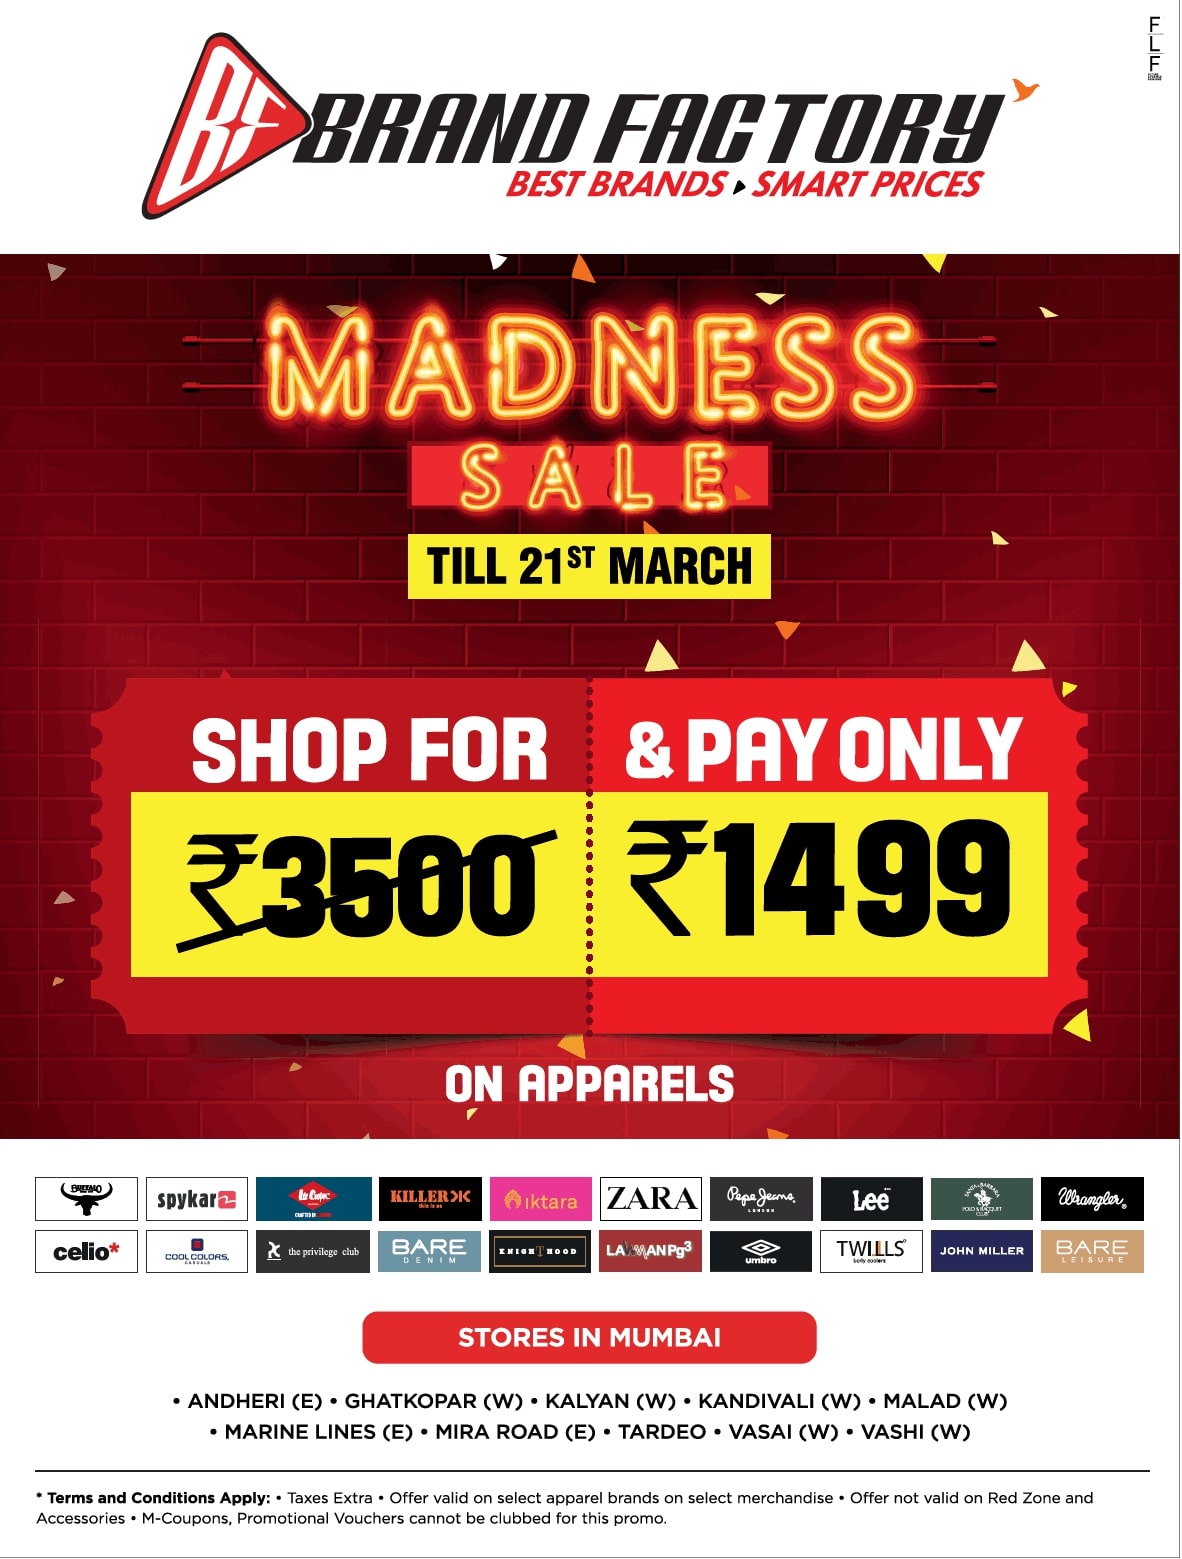 brand-factory-madness-sale-shop-for-3500-pay-only-1499-ad-bombay-times-18-03-2021